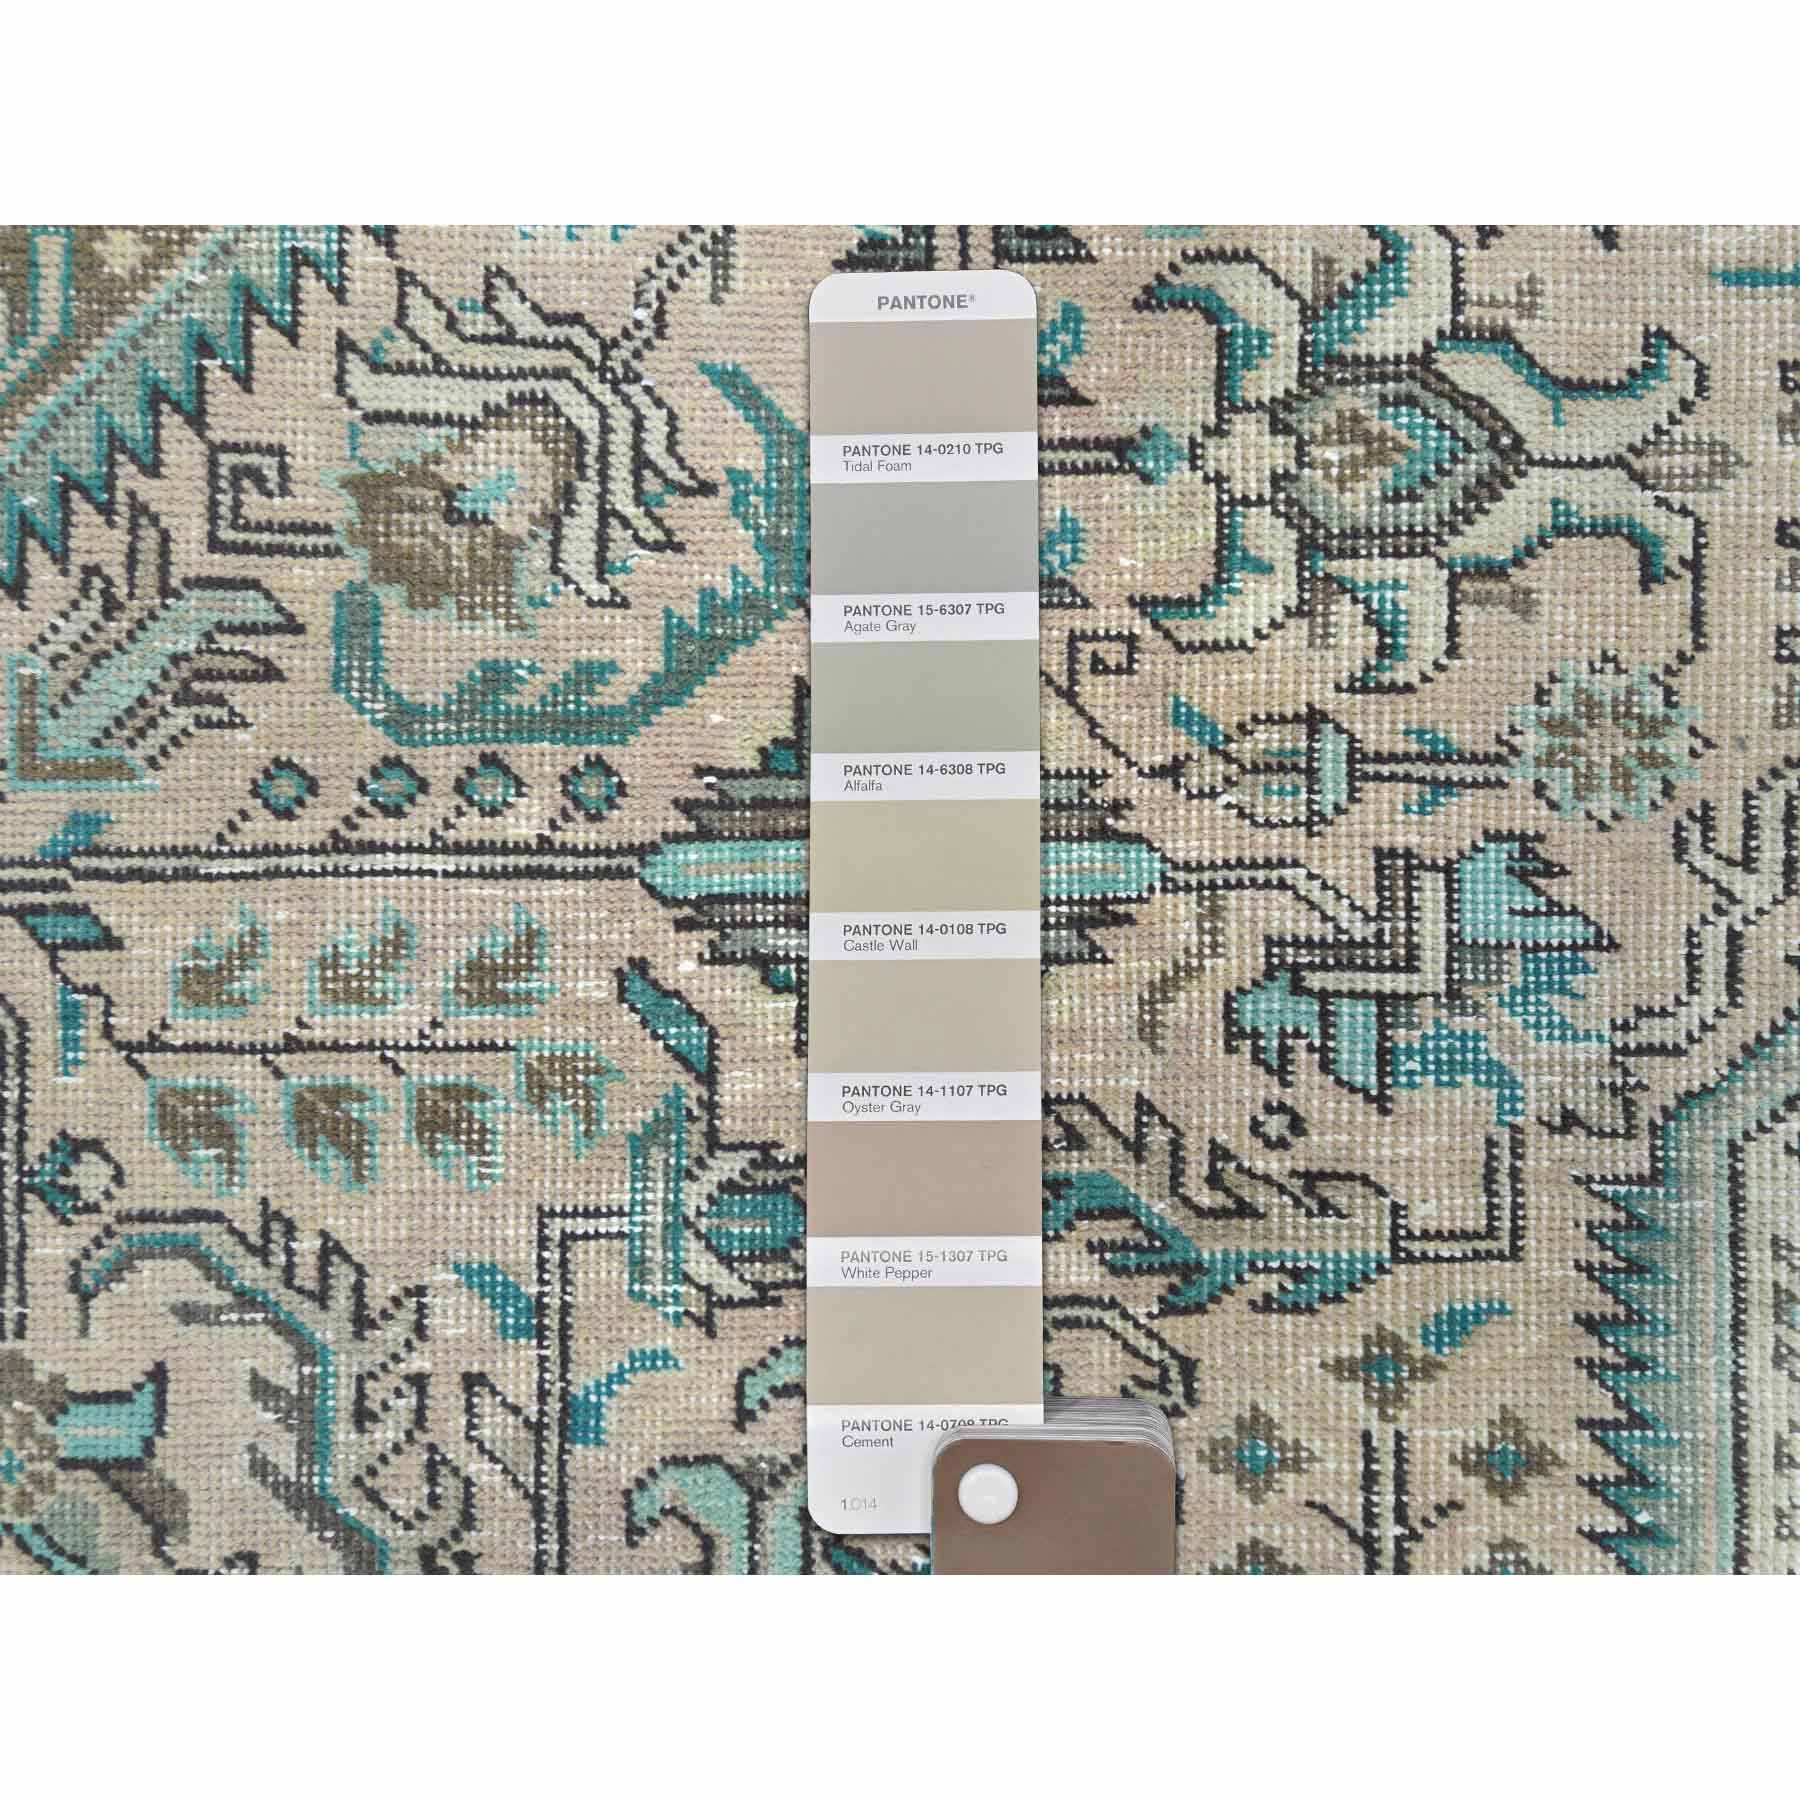 Overdyed-Vintage-Hand-Knotted-Rug-405515